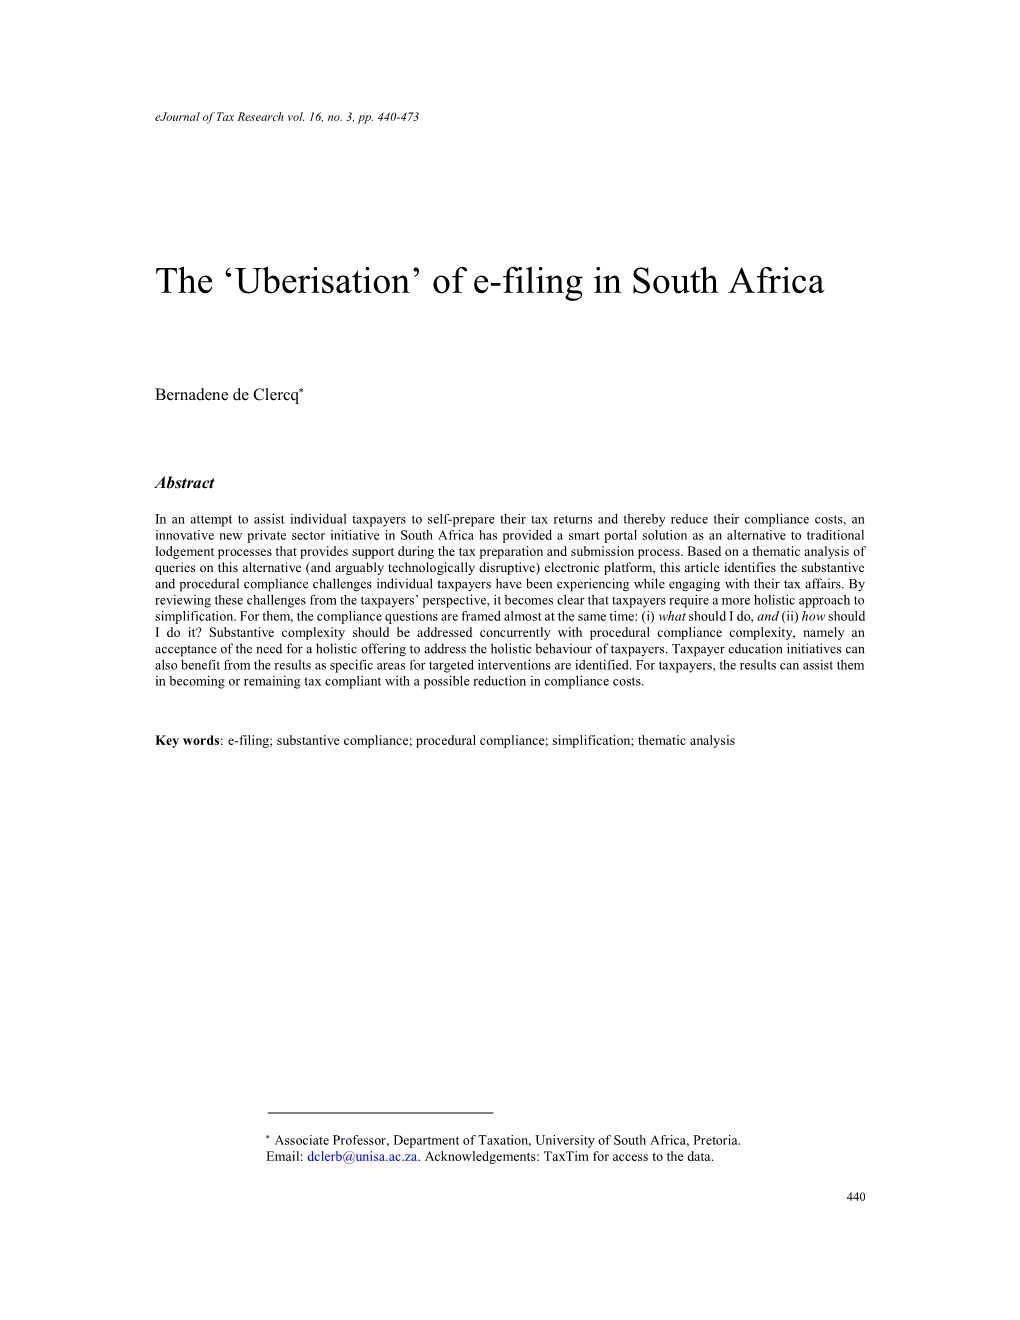 The 'Uberisation' of E-Filing in South Africa